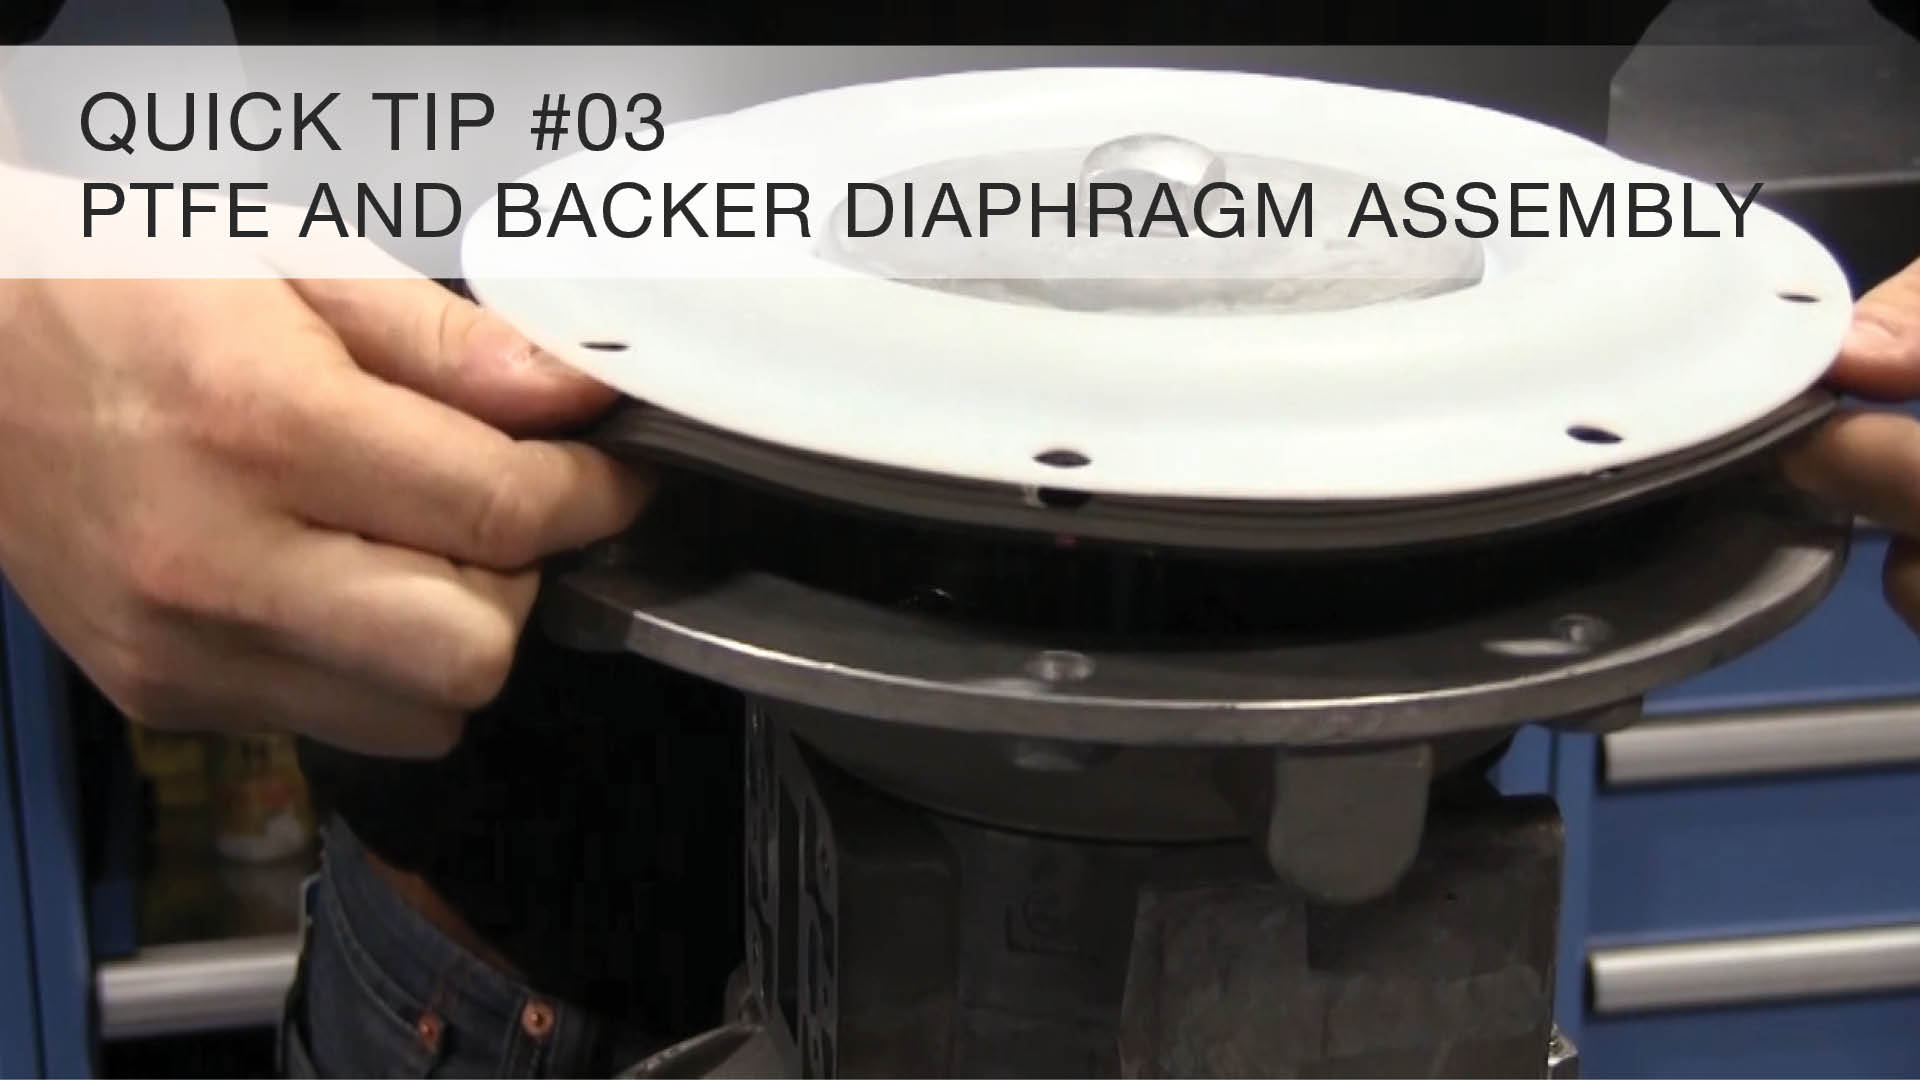 Quick Tip #03 - PTFE and Backer Diaphragm Assembly